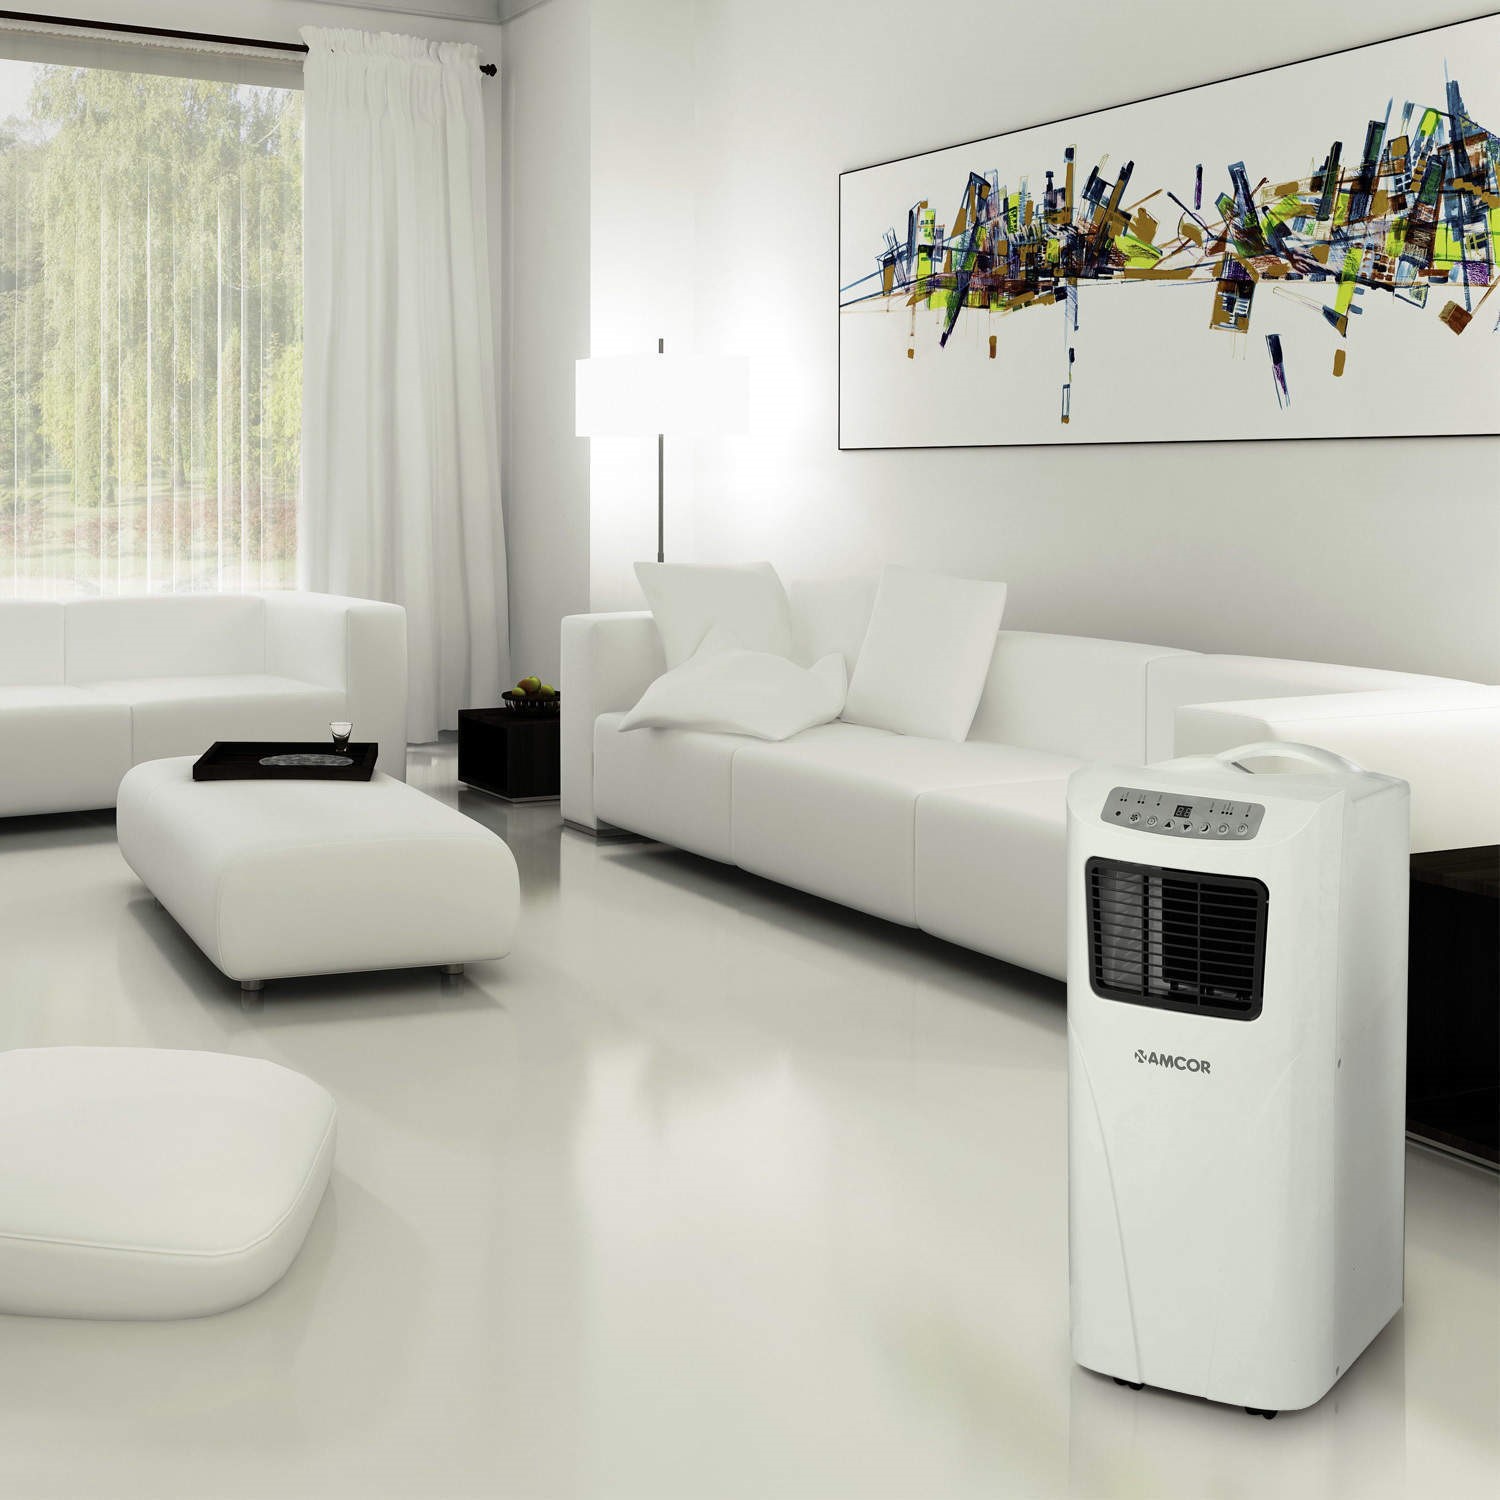 Amcor SF8000E Portable Air Conditioning Unit Mobile Air Conditioner for Rooms and Offices up to 18 sqm 